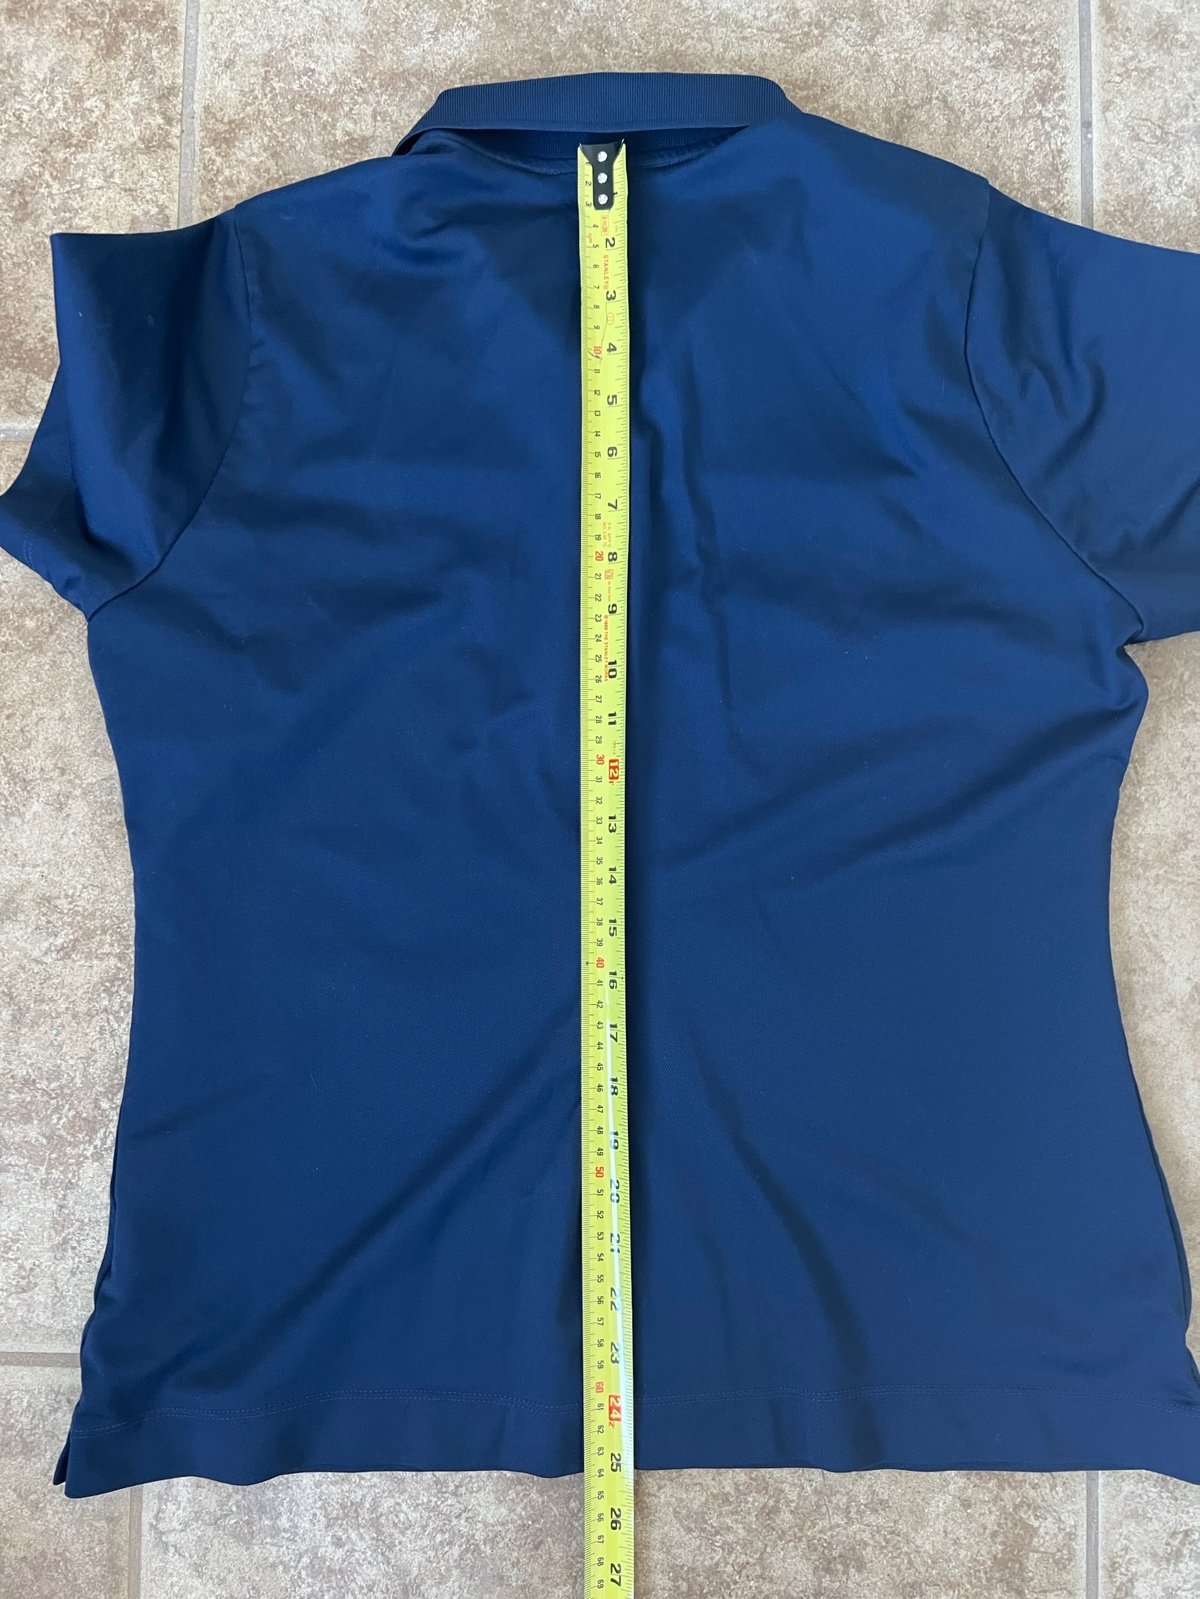 the Lowest price Nike Dri-Fit Women´s Short Sleeve Golf Polo Shirt Solid Blue Size XL lSdqgPbW0 Factory Price